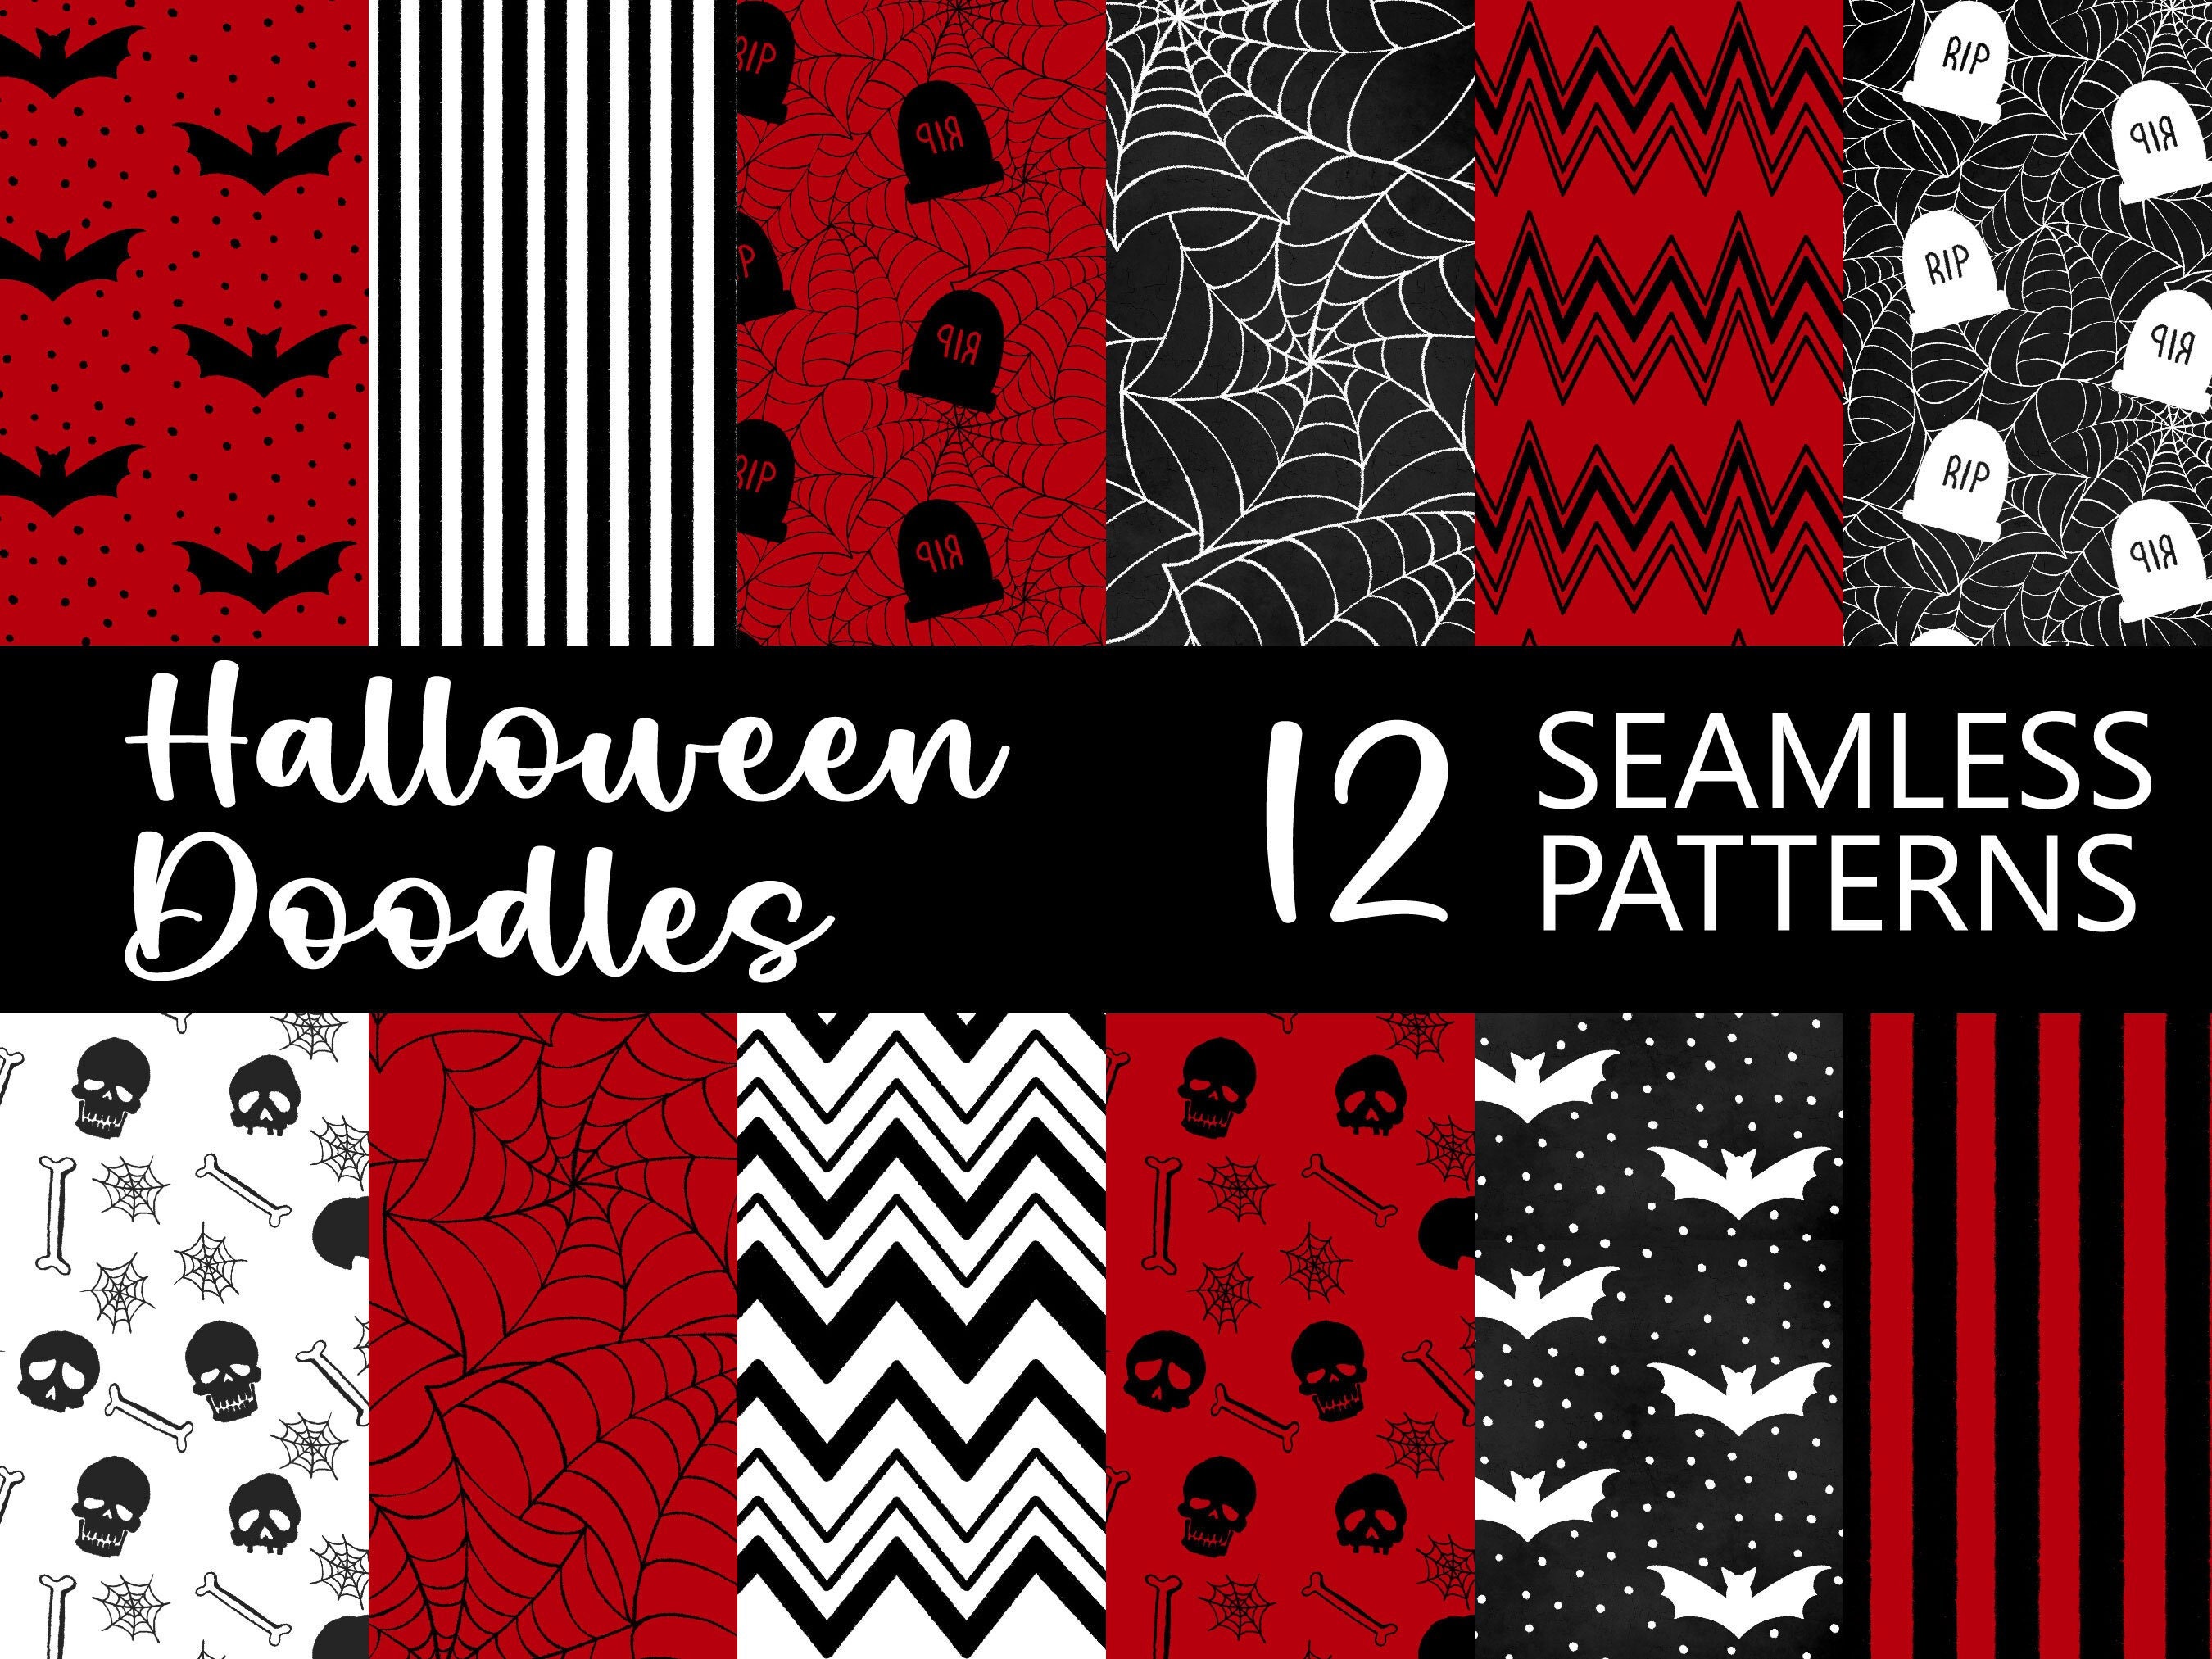 Goth Car Seat Covers, Gothic Vehicle Accessories, Creepy Spiderweb Pattern  Alt Edgy Spooky Red Black Dark Witchy Vampire Aesthetic 